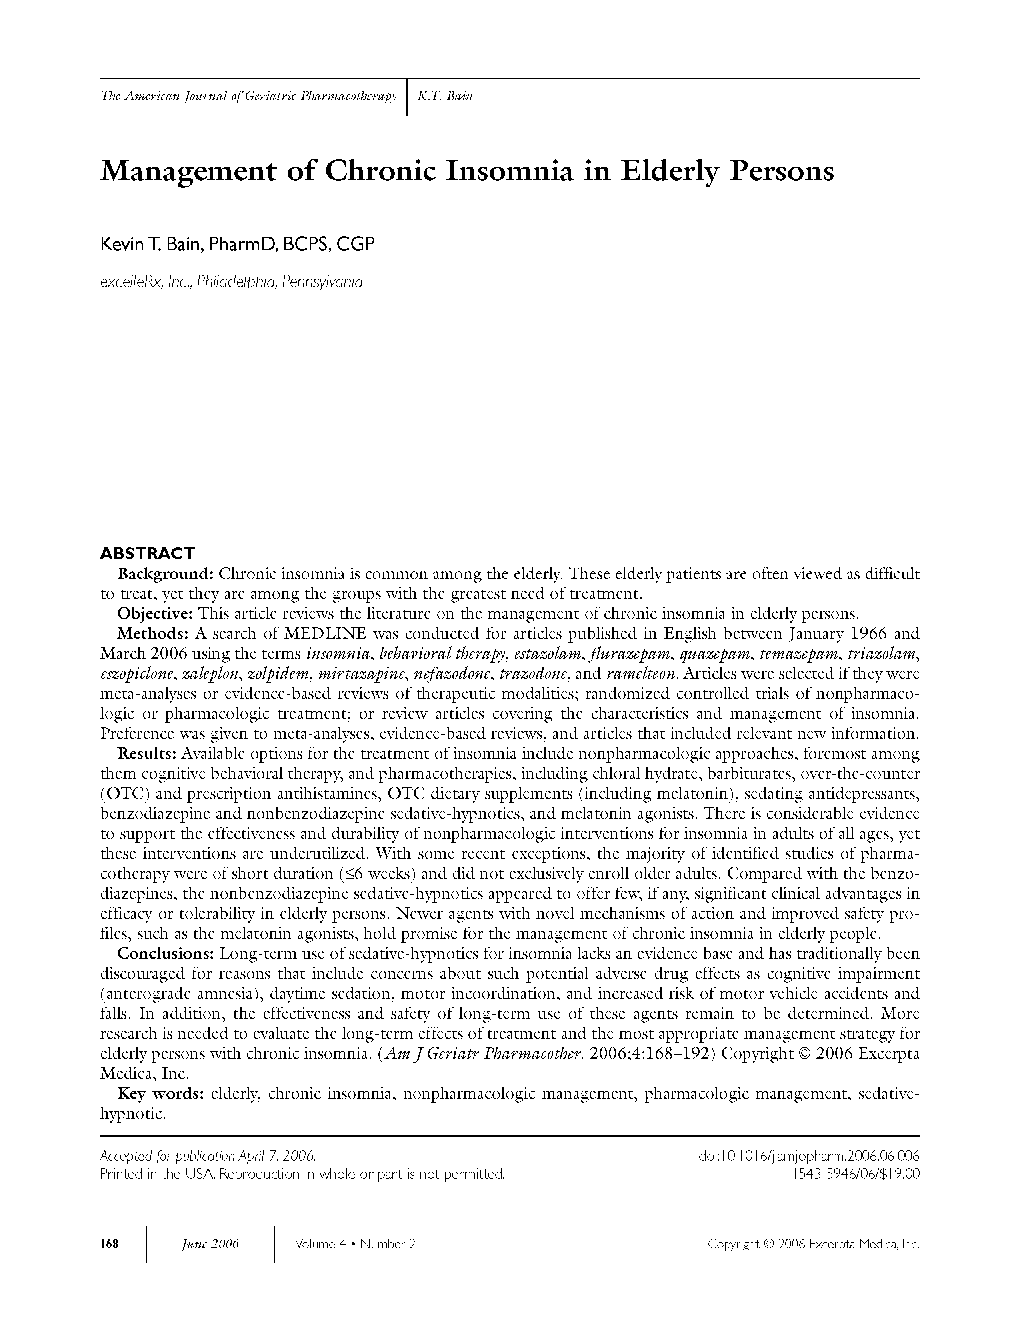 Management of chronic insomnia in elderly persons